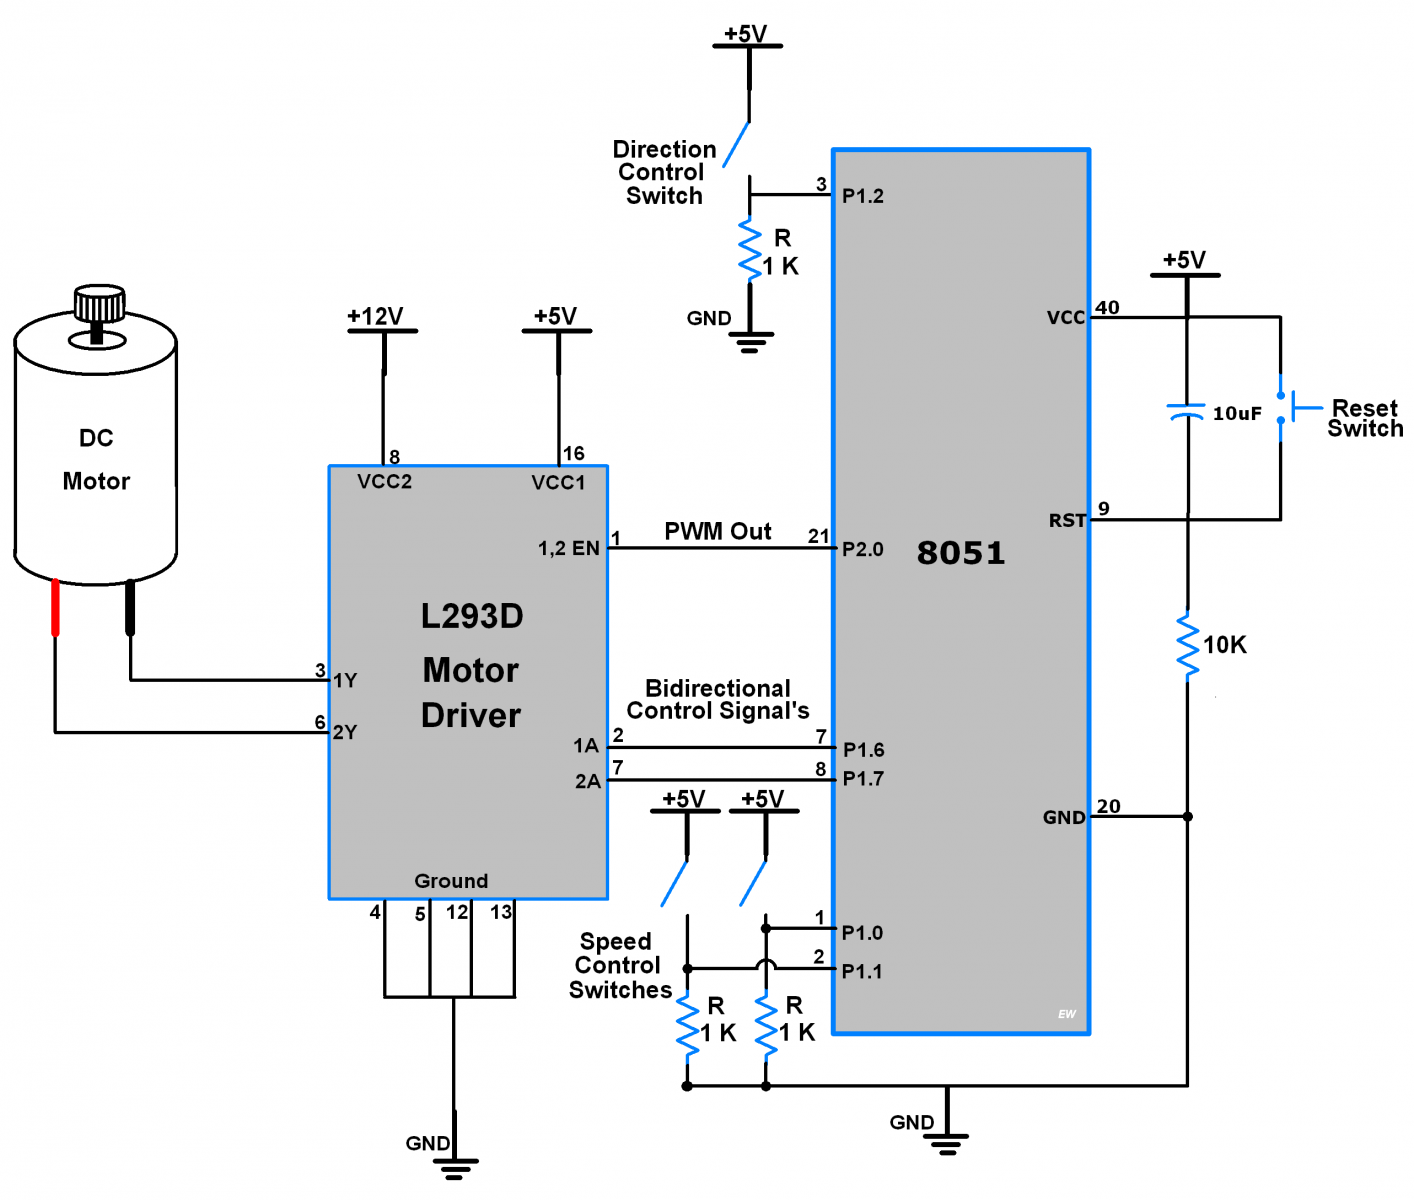 Connection of DC motor to 8051 using Motor Driver IC L293D